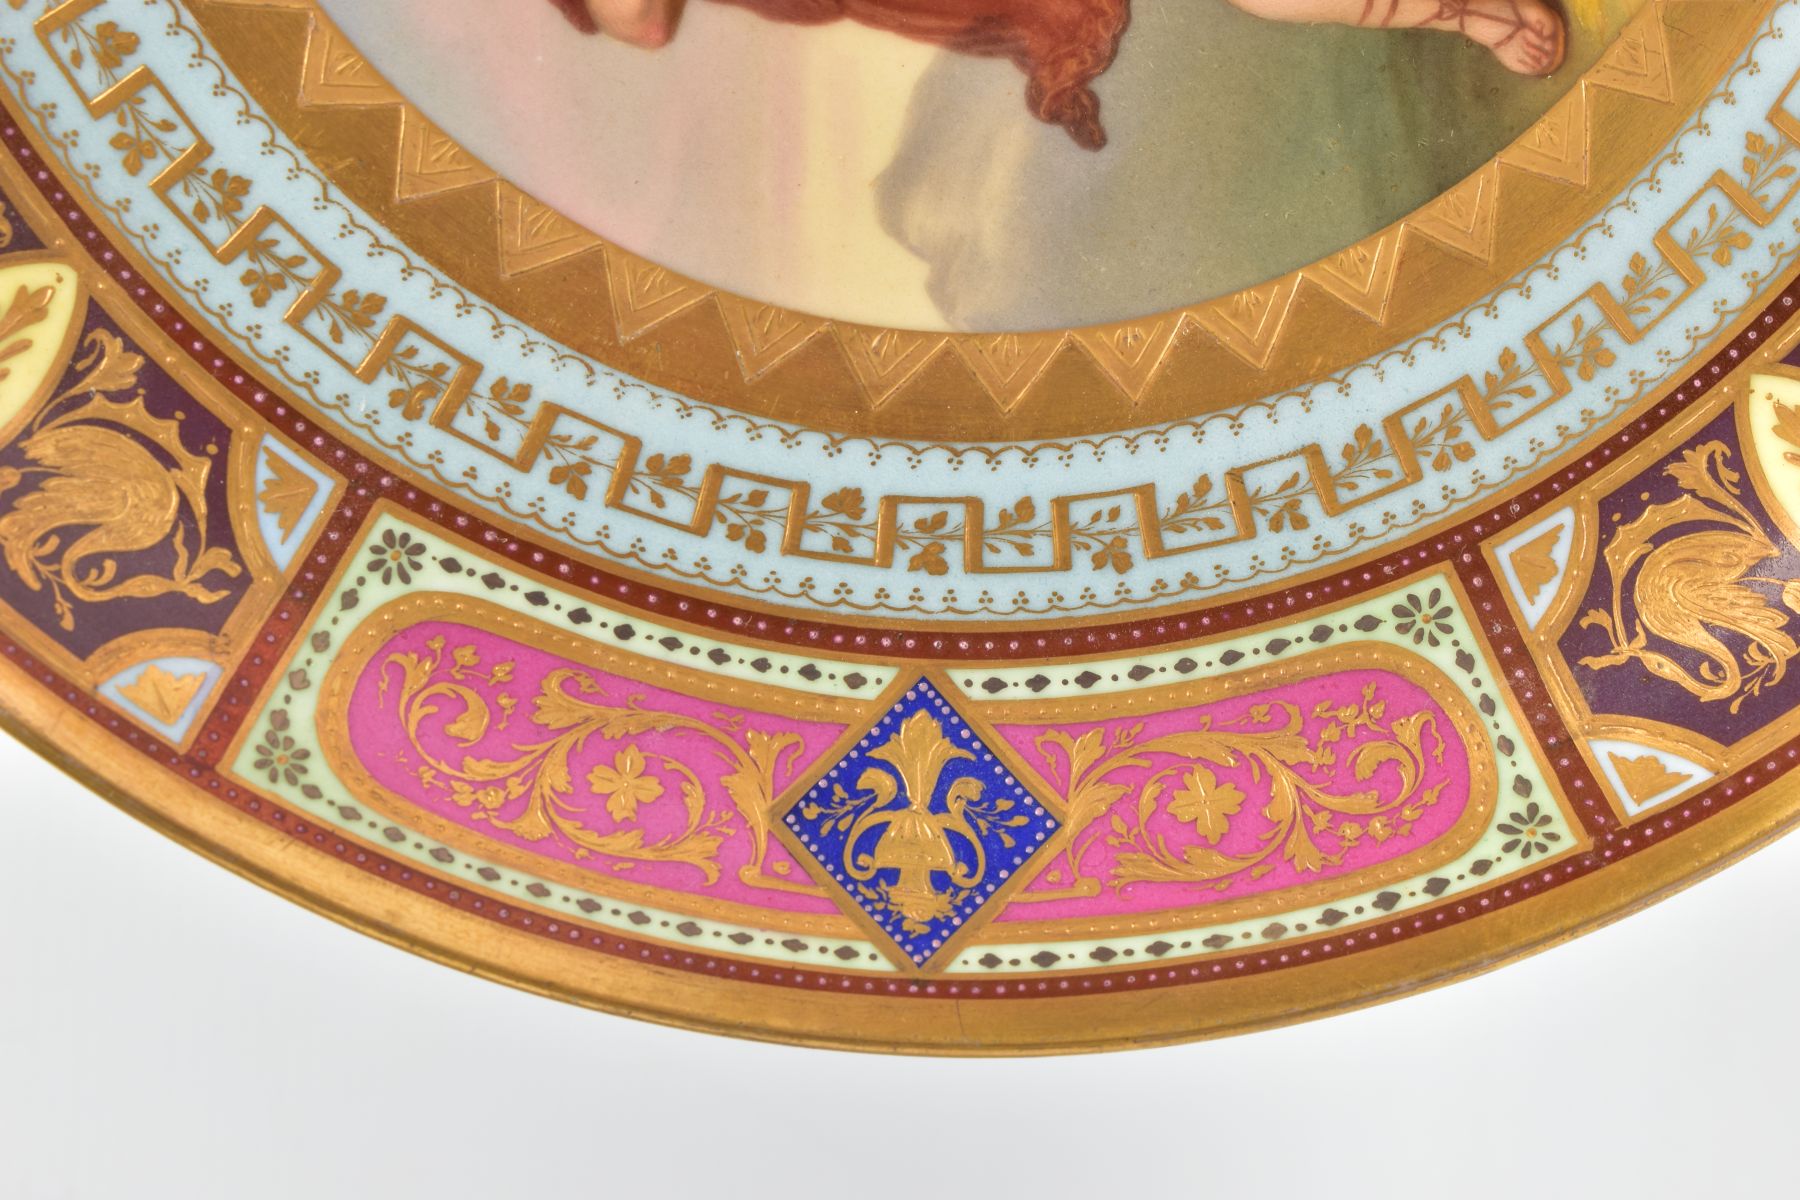 TWO LATE 19TH CENTURY VIENNA STYLE PORCELAIN CHARGERS, with polychrome and gilt borders - Image 4 of 15